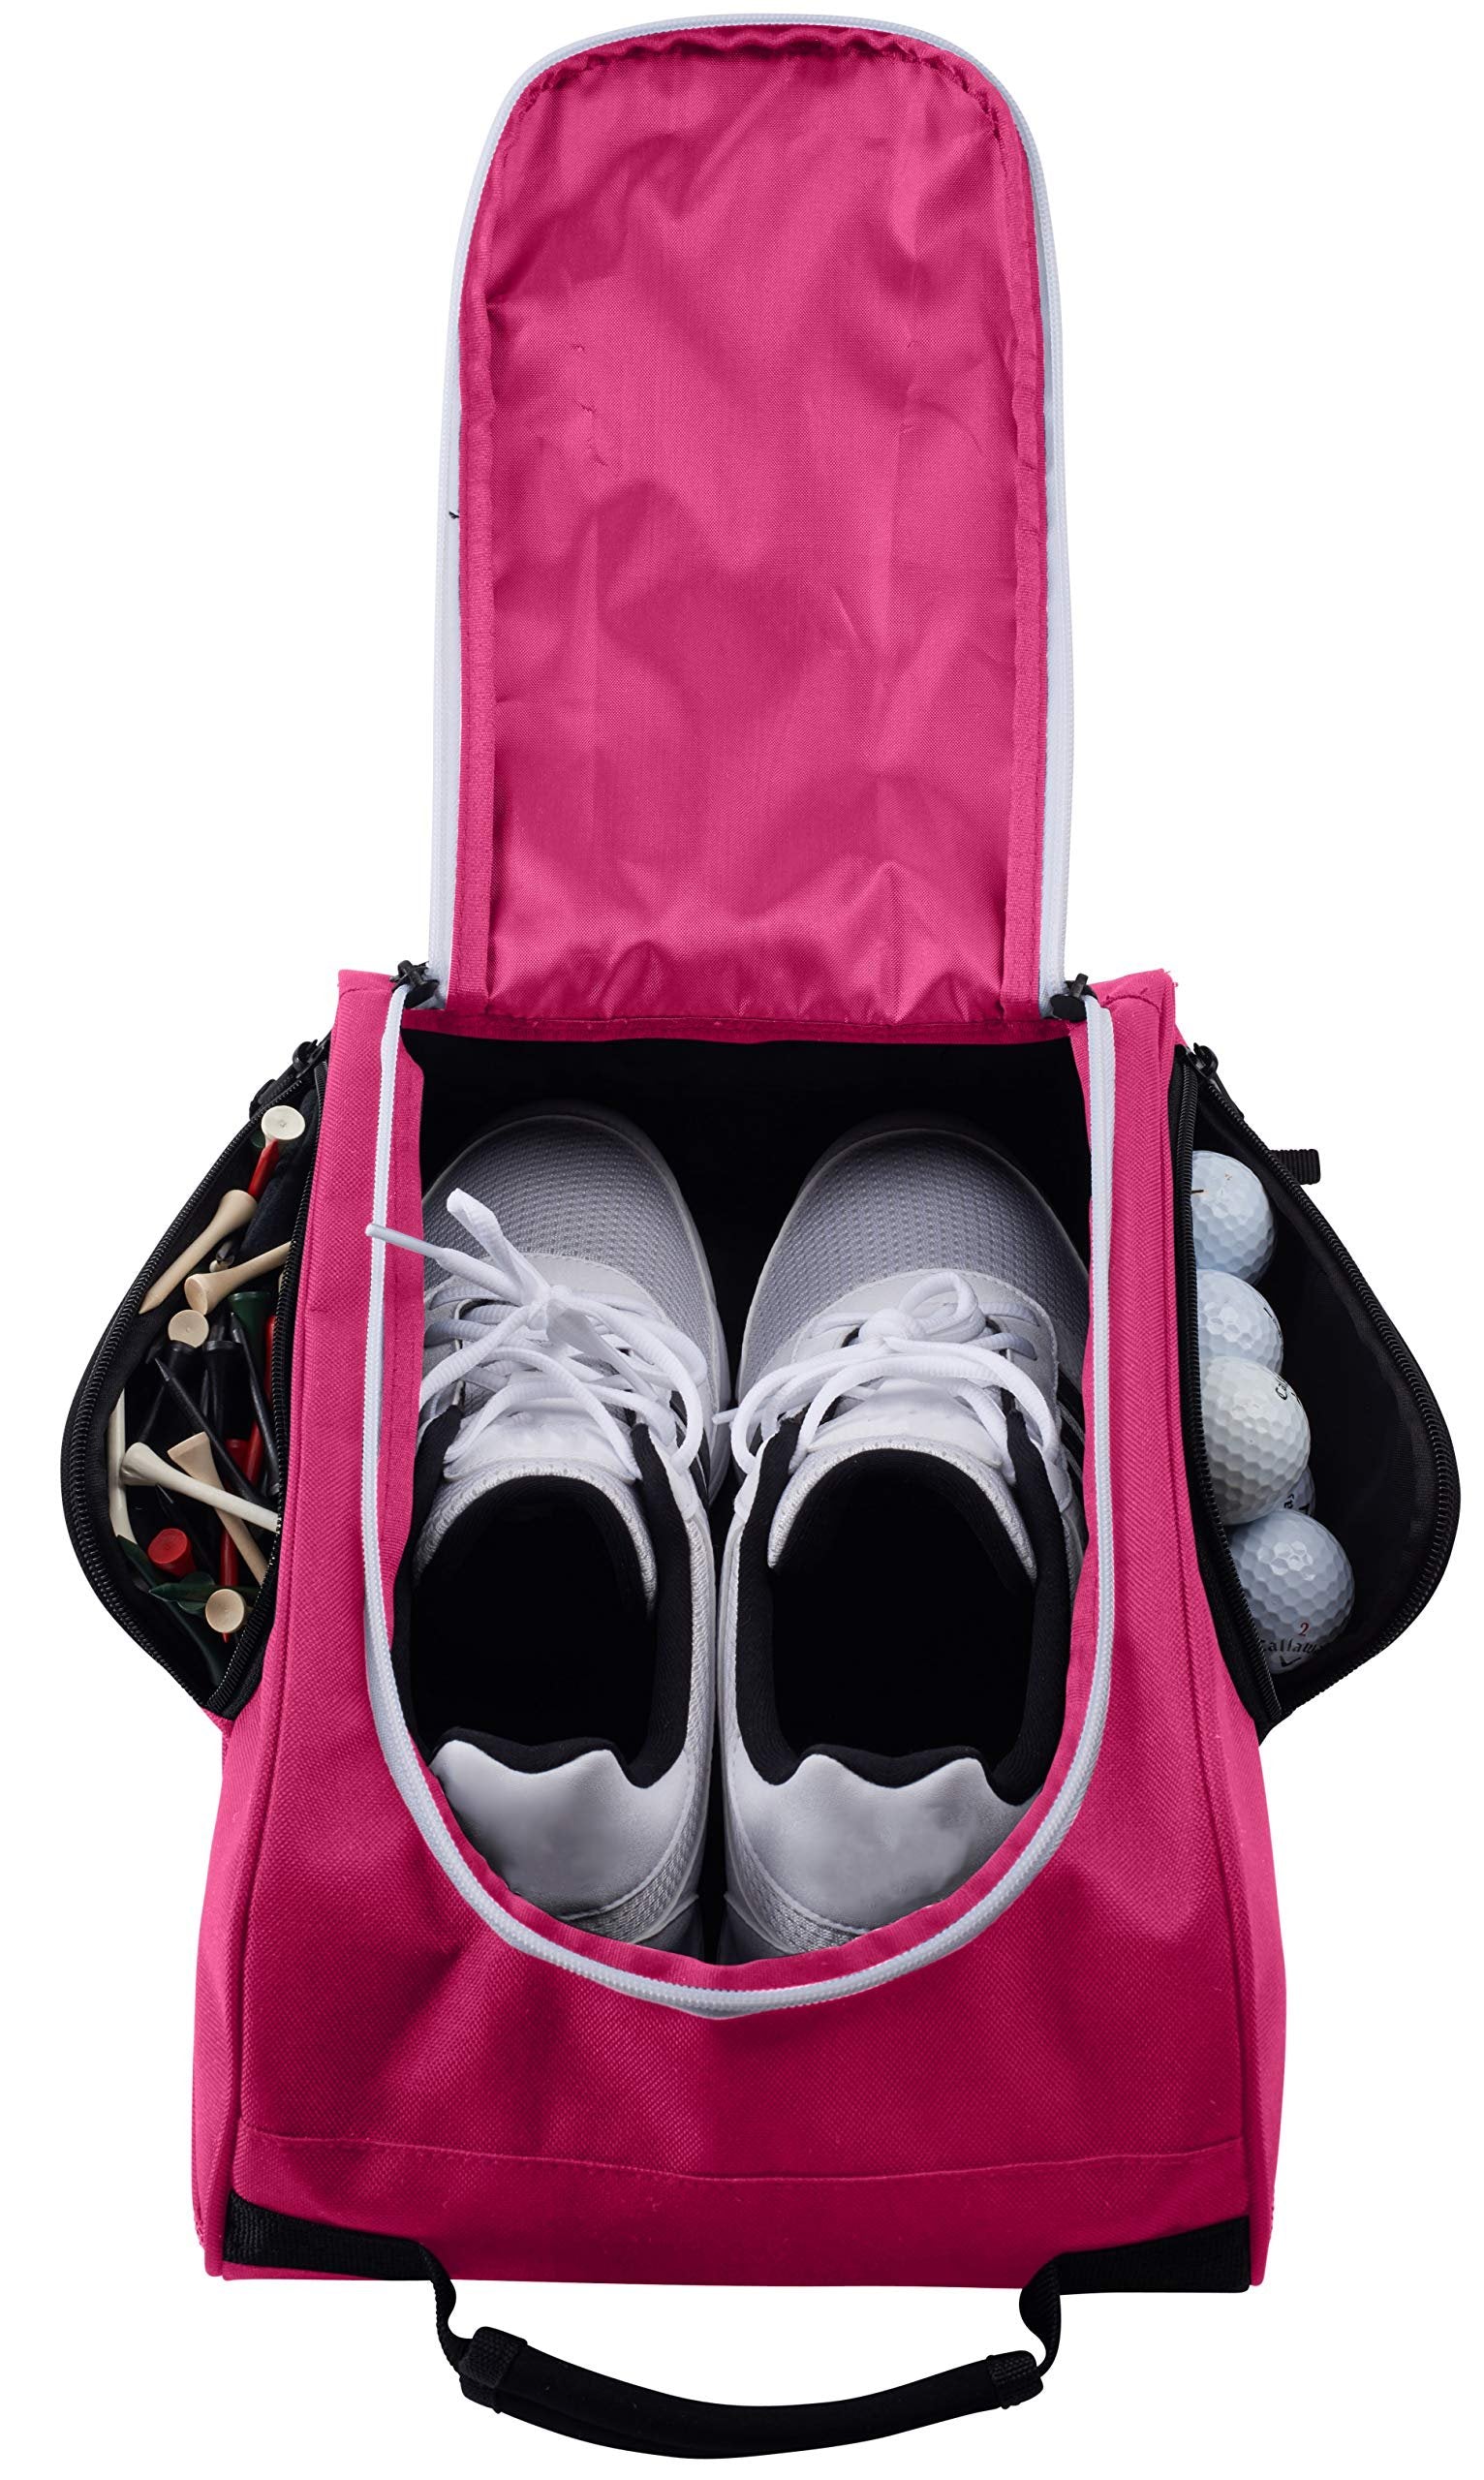 Athletico Golf Shoe Bag - Zippered Shoe Carrier Bags With Ventilation & Outside Pocket for Socks, Tees, etc. (Pink)